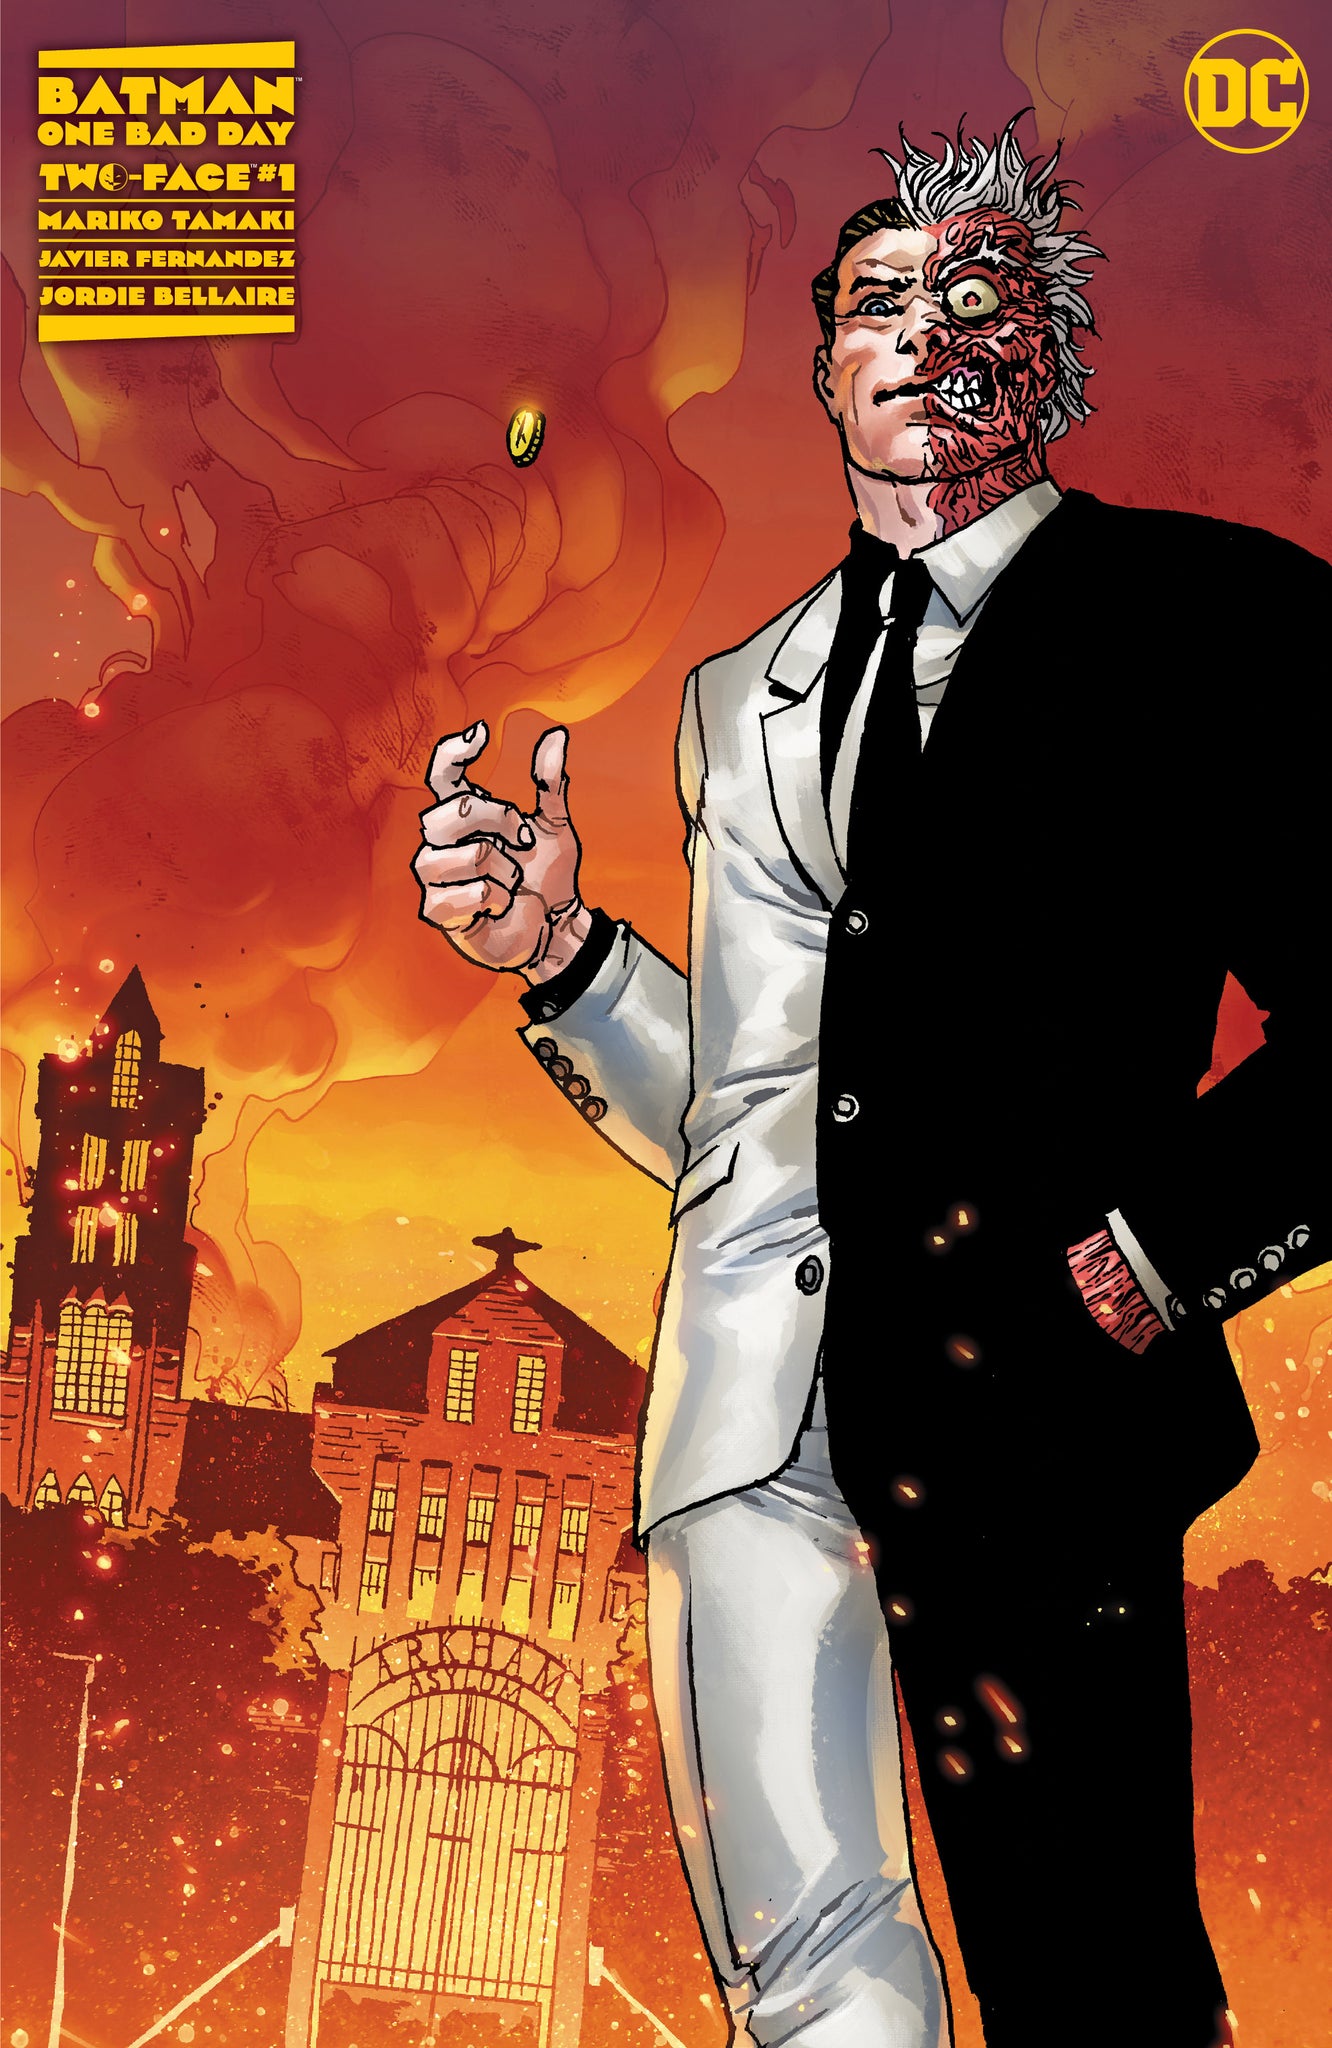 BATMAN ONE BAD DAY TWO-FACE #1